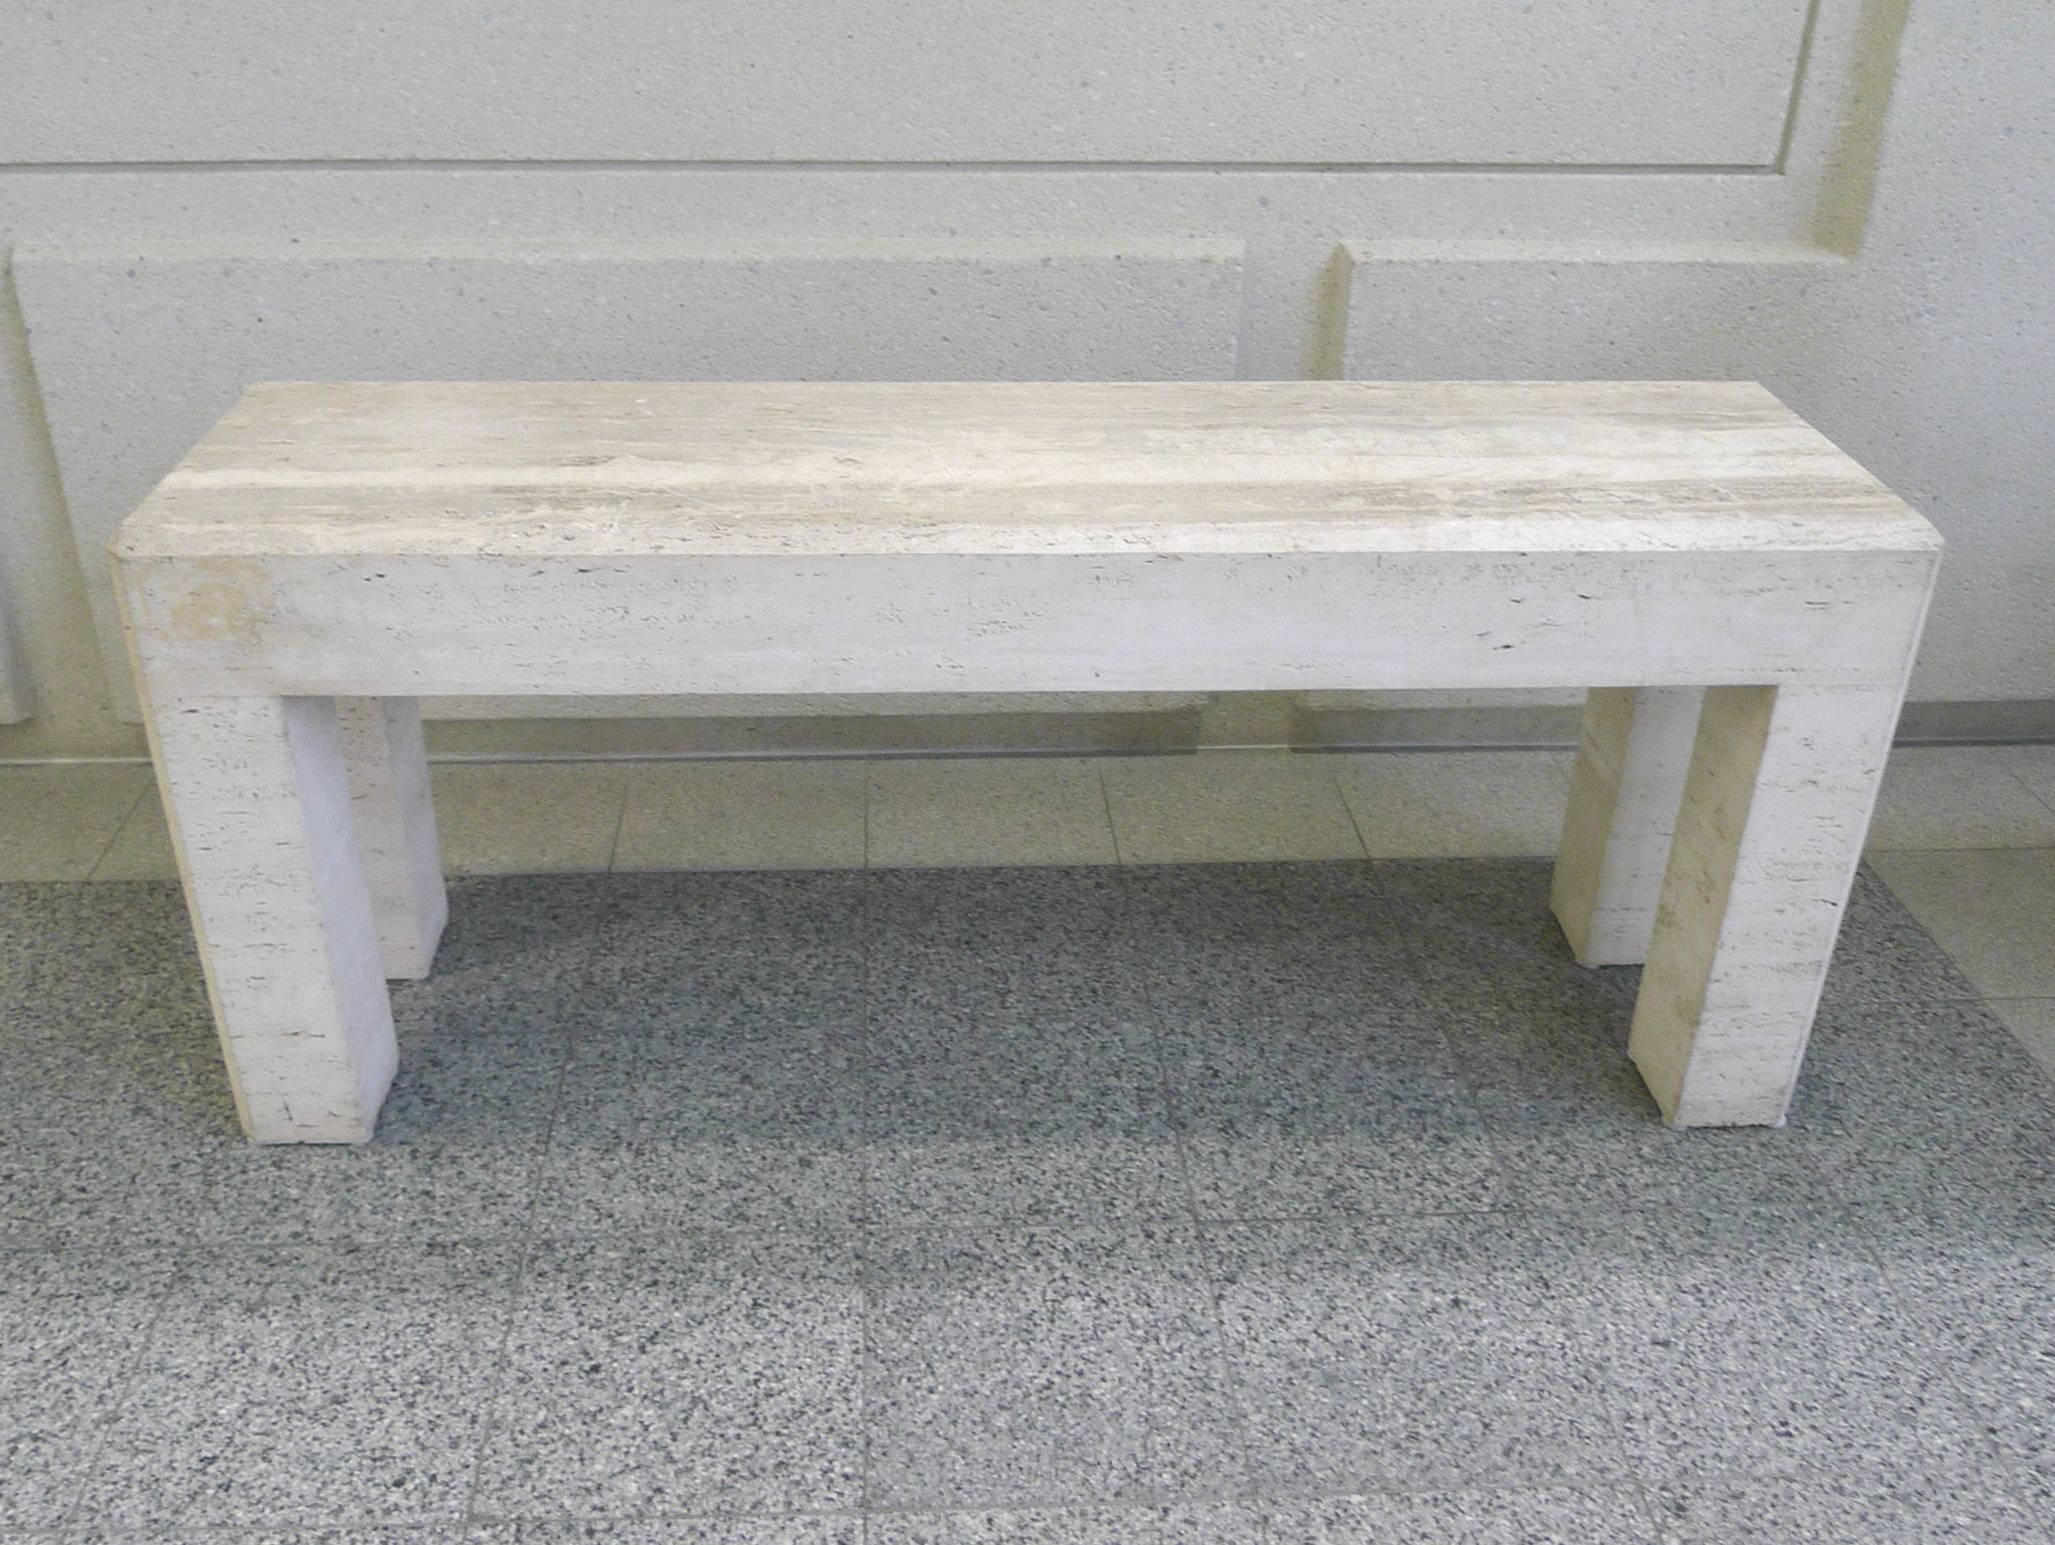 Because of its low height, this 20th Century travertine parsons console table can be utilized as a sofa table or as a tall coffee table. The table's design is minimal and makes great decorative use of the travertine's inherent properties. The pocked